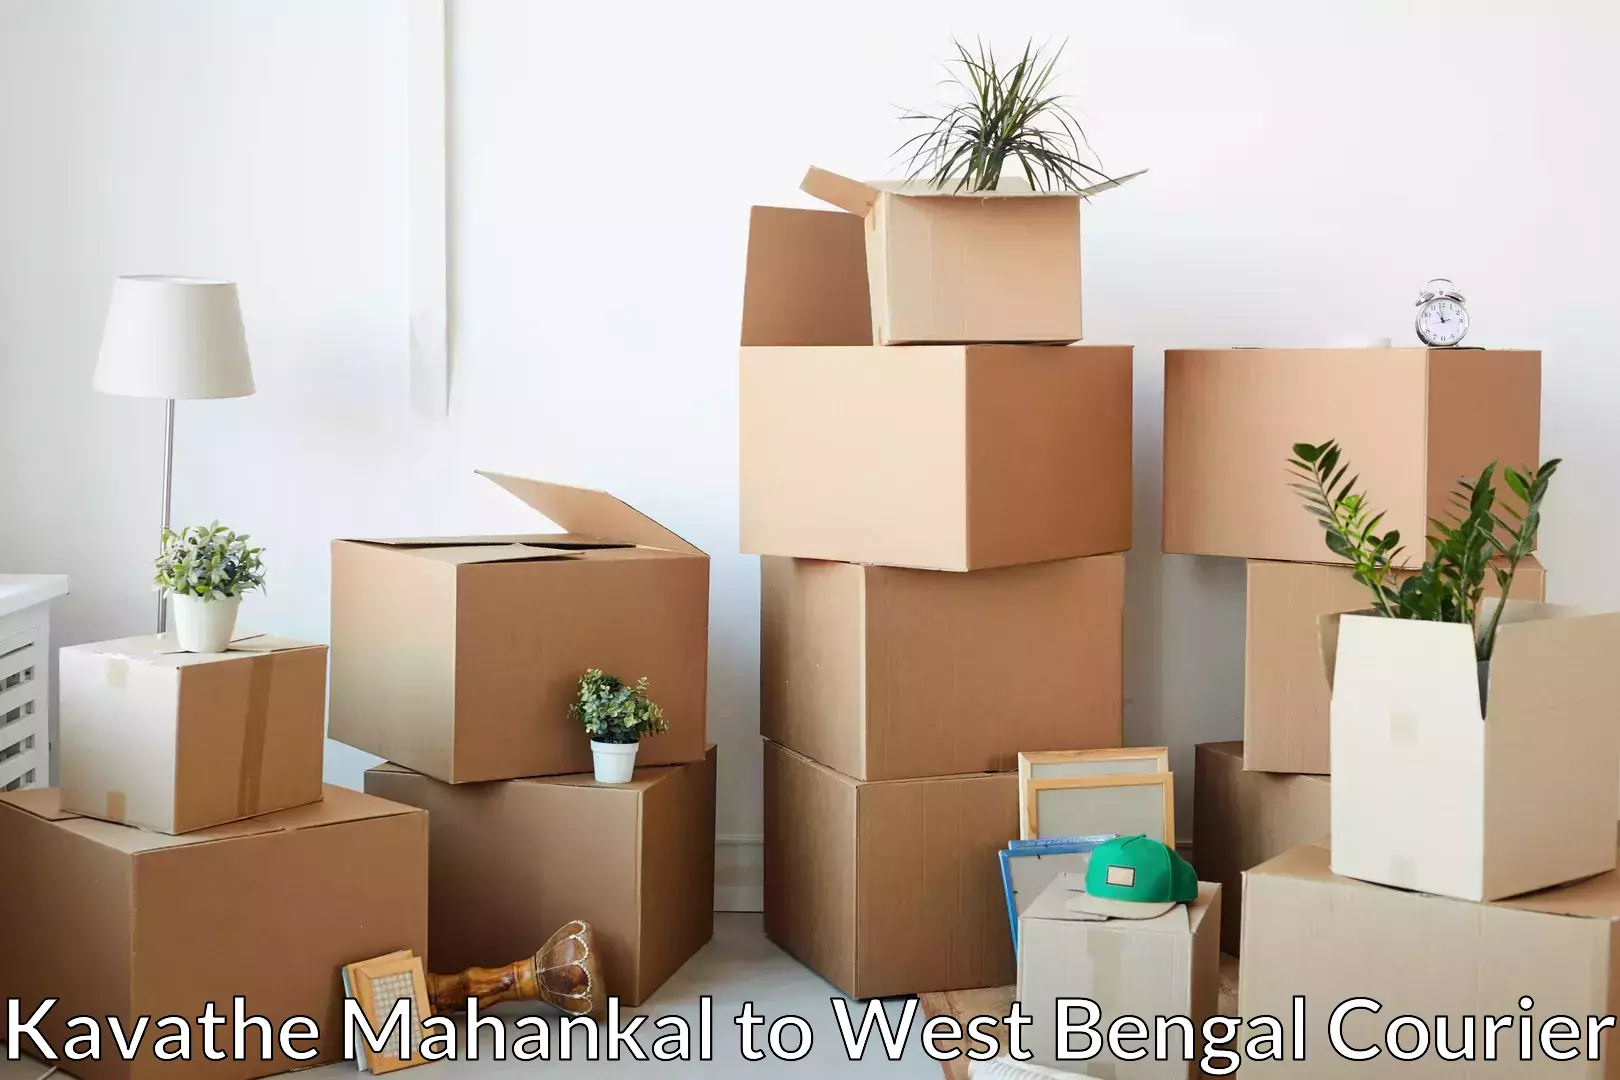 Reliable moving assistance in Kavathe Mahankal to Chittaranjan